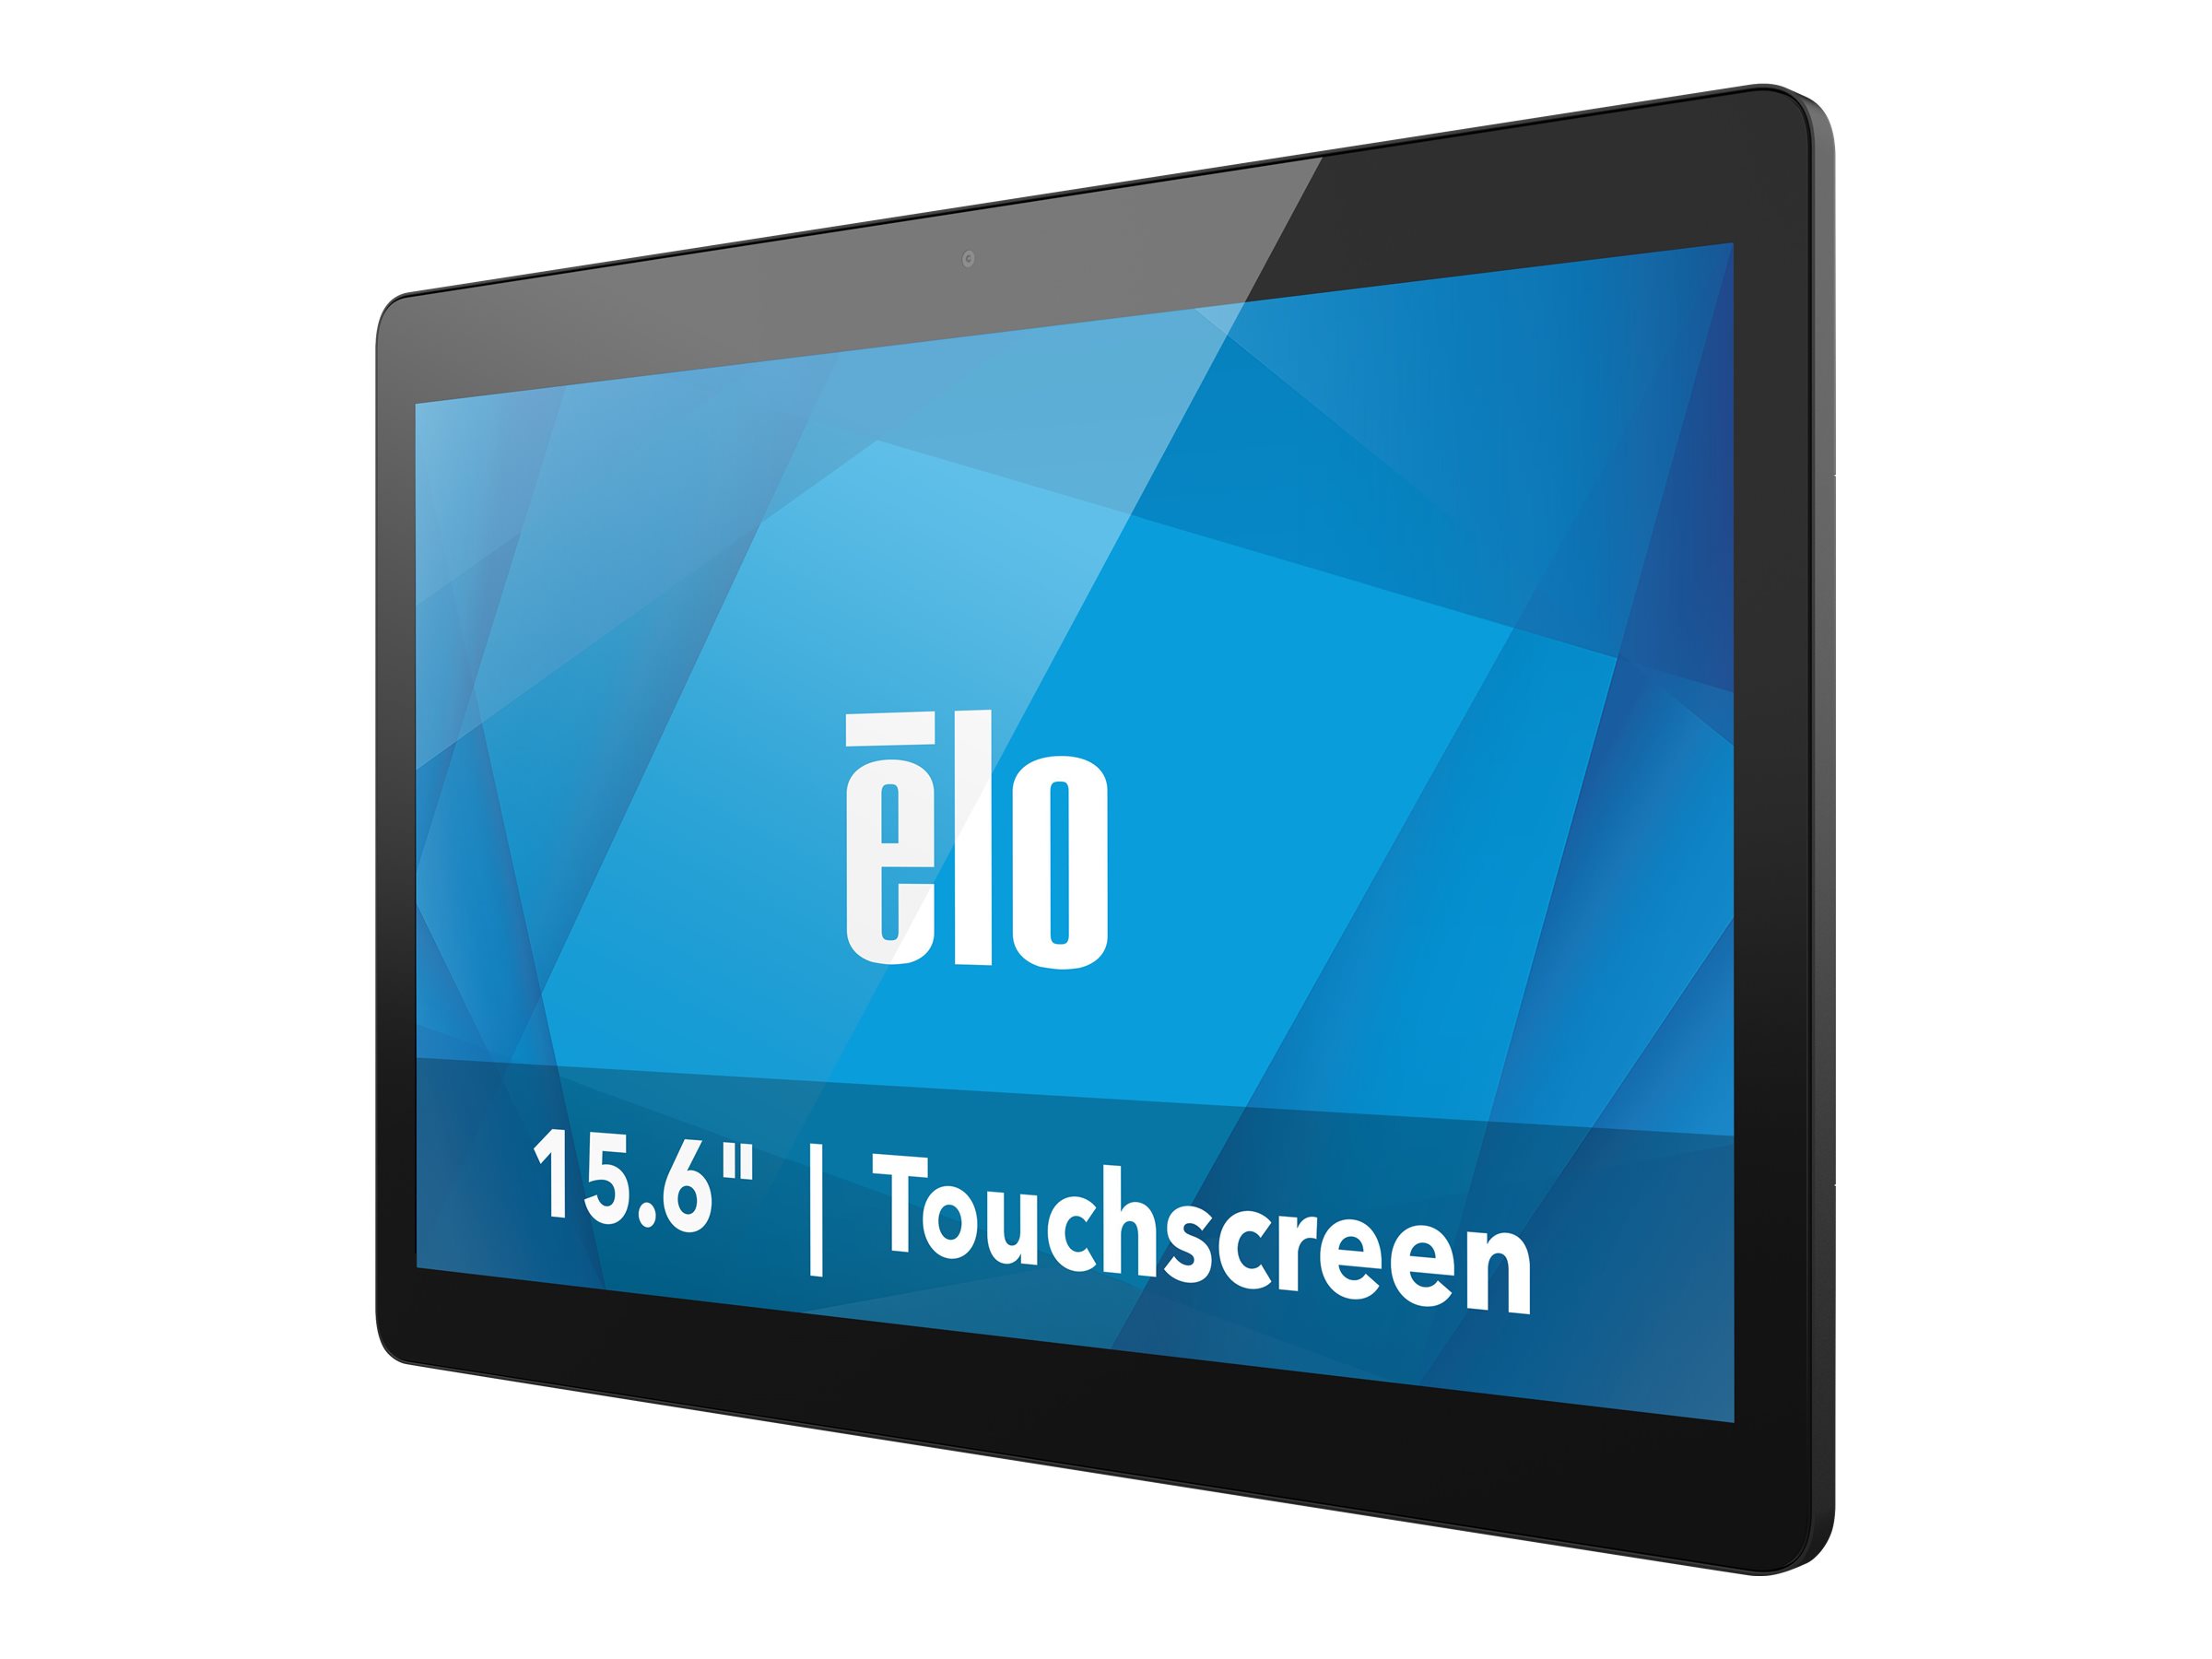 Elo Touch Solutions Elo I-Series 4.0 - Value - All-in-One (Komplettlösung) - 1 RK3399 - RAM 4 GB - Flash 32 GB - GigE - WLAN: 802.11a/b/g/n/ac, Bluetooth 5.0 - Android 10 - Monitor: LED 39.624 cm (15.6")